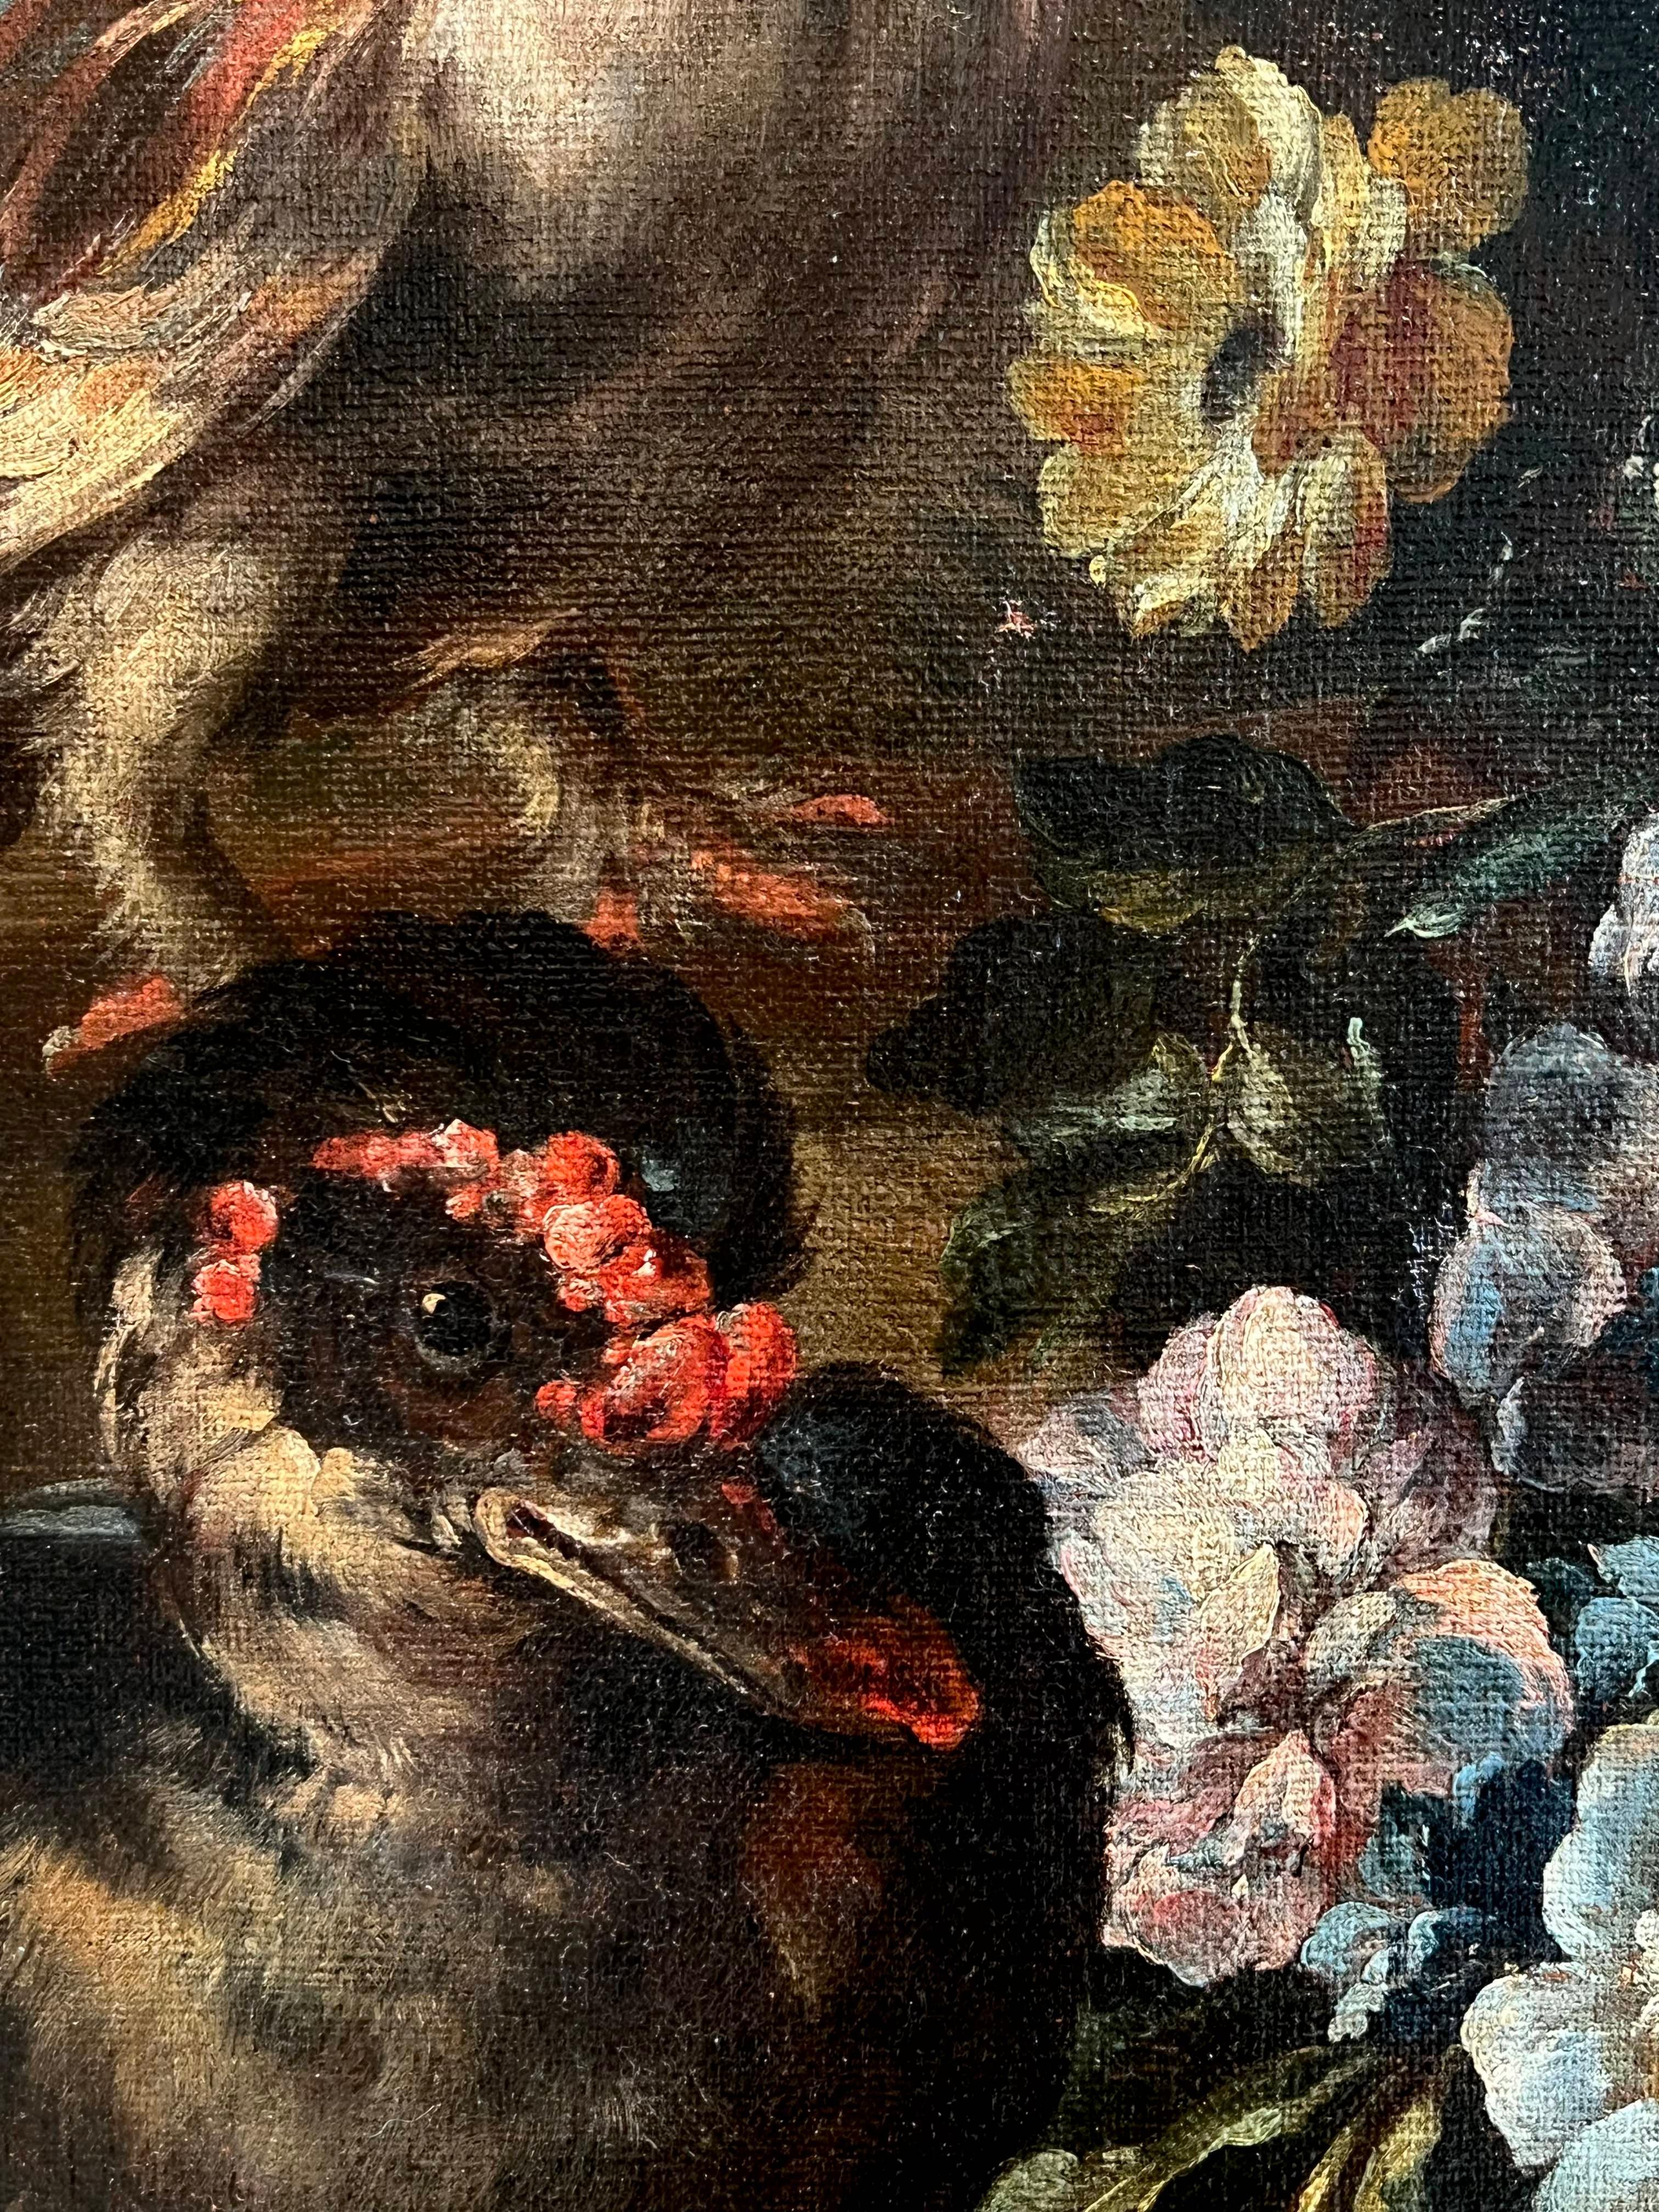 Huge late 17th, early 18th century Italian Old master - A peacock doves and a duck holding flowers in a park landscape at sunset, attr. Angelo Maria Crivelli

In a peaceful park landscape, a majestic peacock is sitting on a vibrant bouquet of fresh